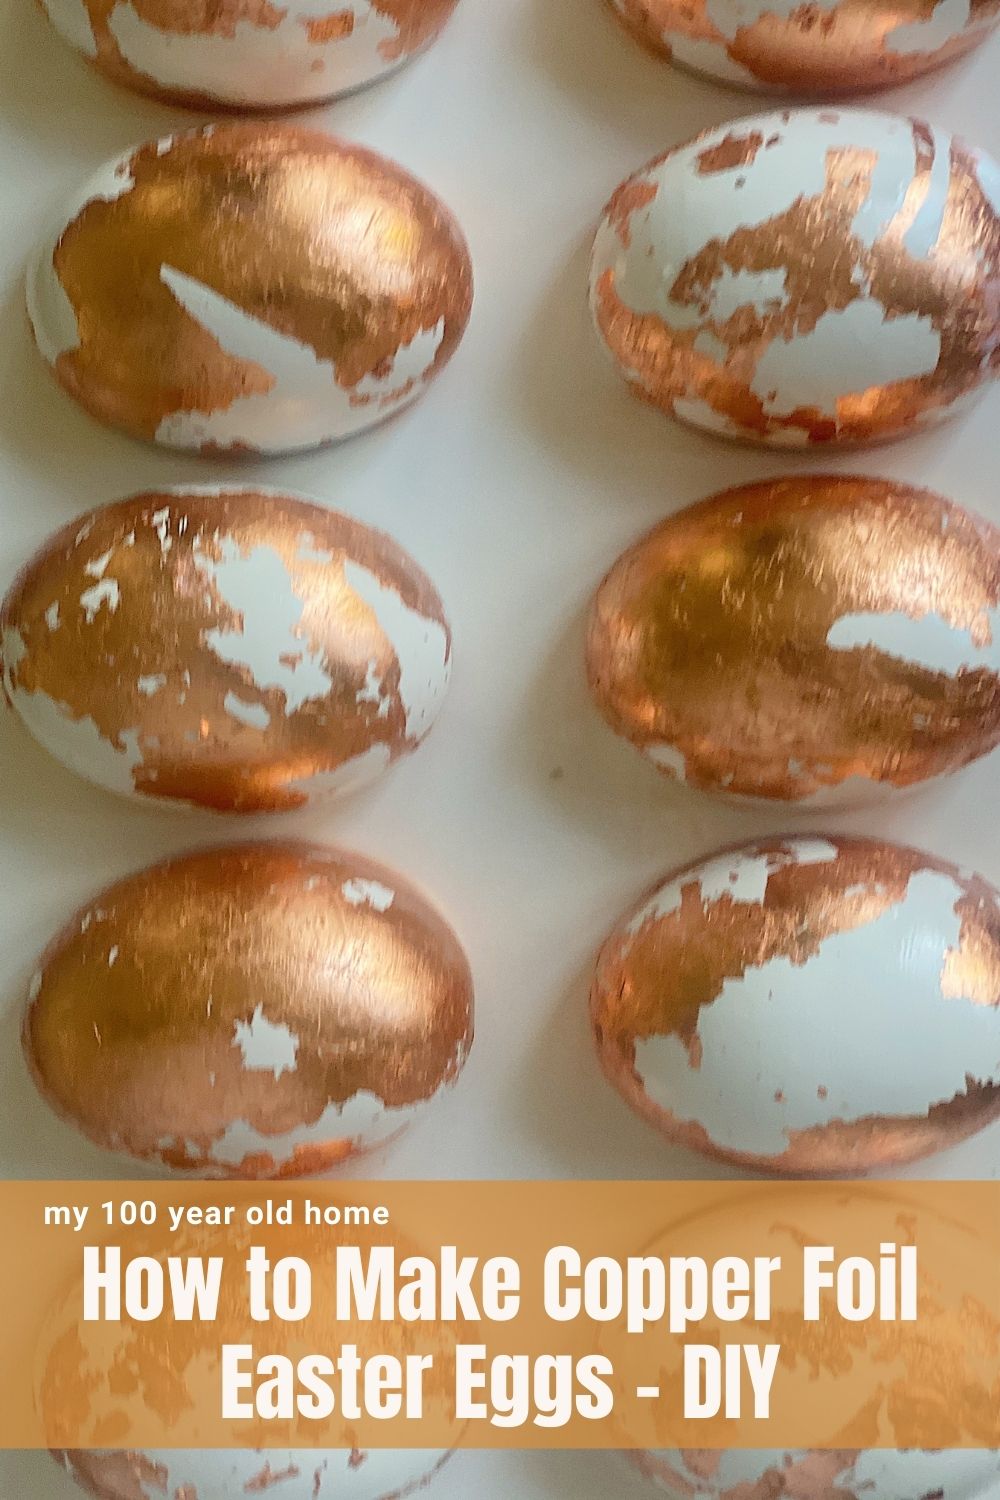 Easter is around the corner and I am sharing one of my favorite ideas for Easter eggs. I loved making these copper foil Easter eggs DIY.